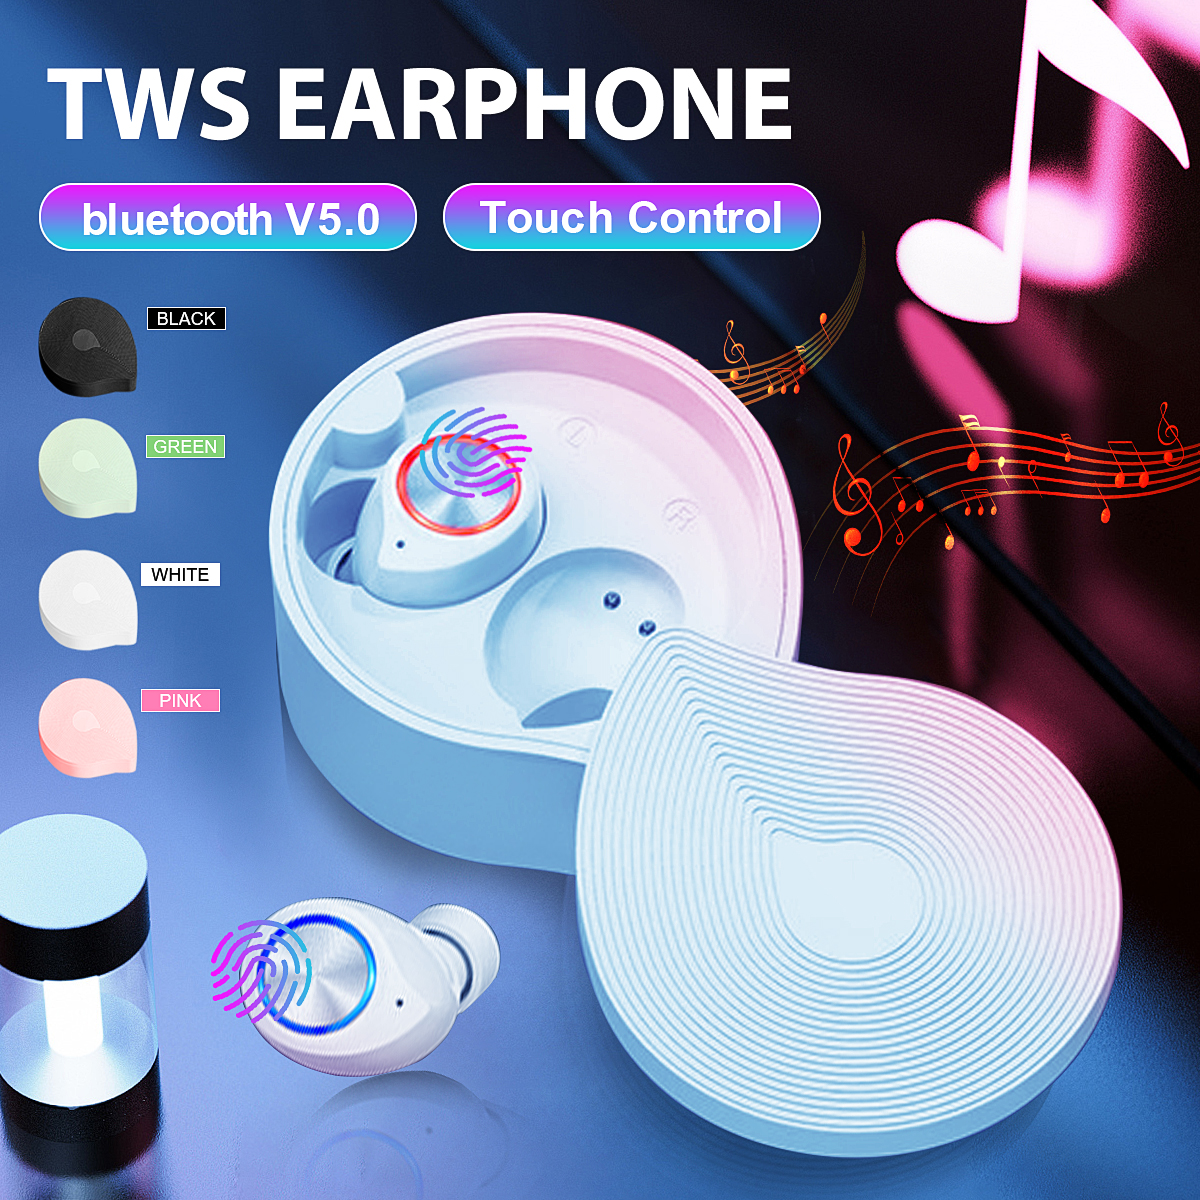 TW70-TWS-bluetooth-50-Earphone-Mini-Stereo-Music-Cute-Earbuds-Smart-Touch-Headphone-with-Mic-Gift-1638439-1